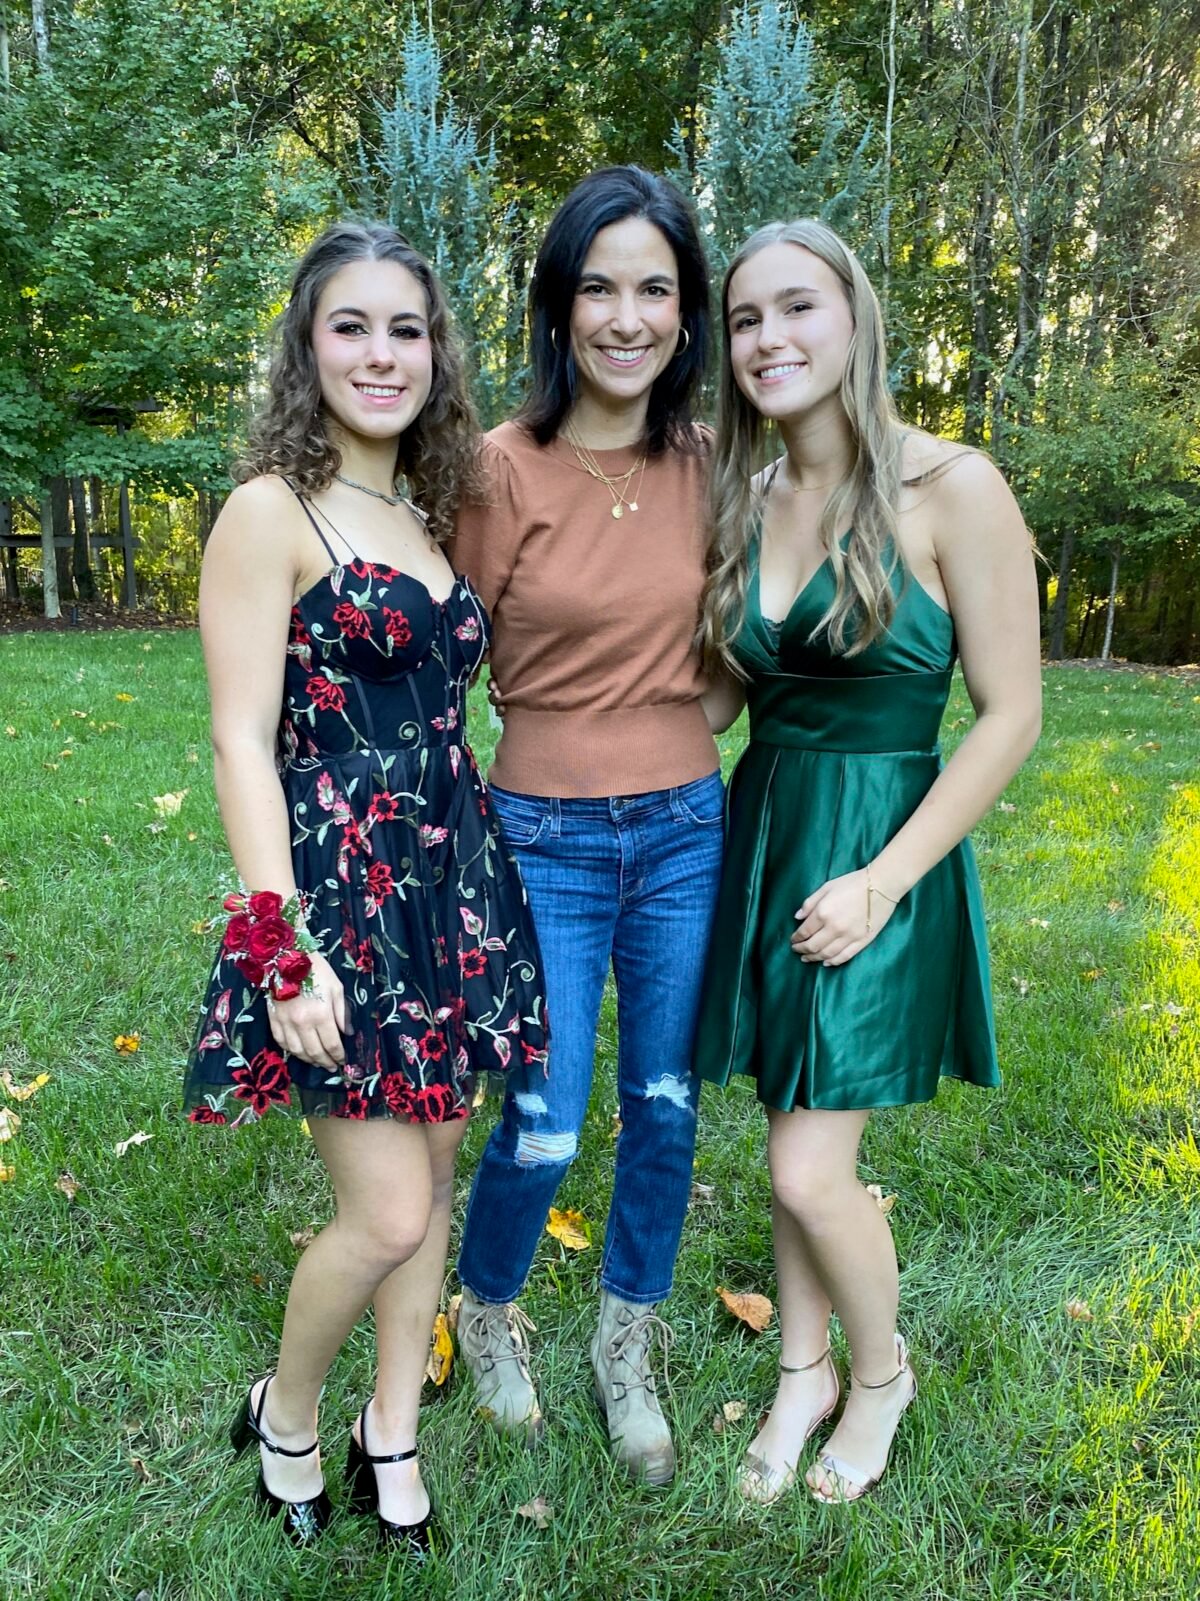 Lisa Leake and her two daughters before their high school homecoming party.